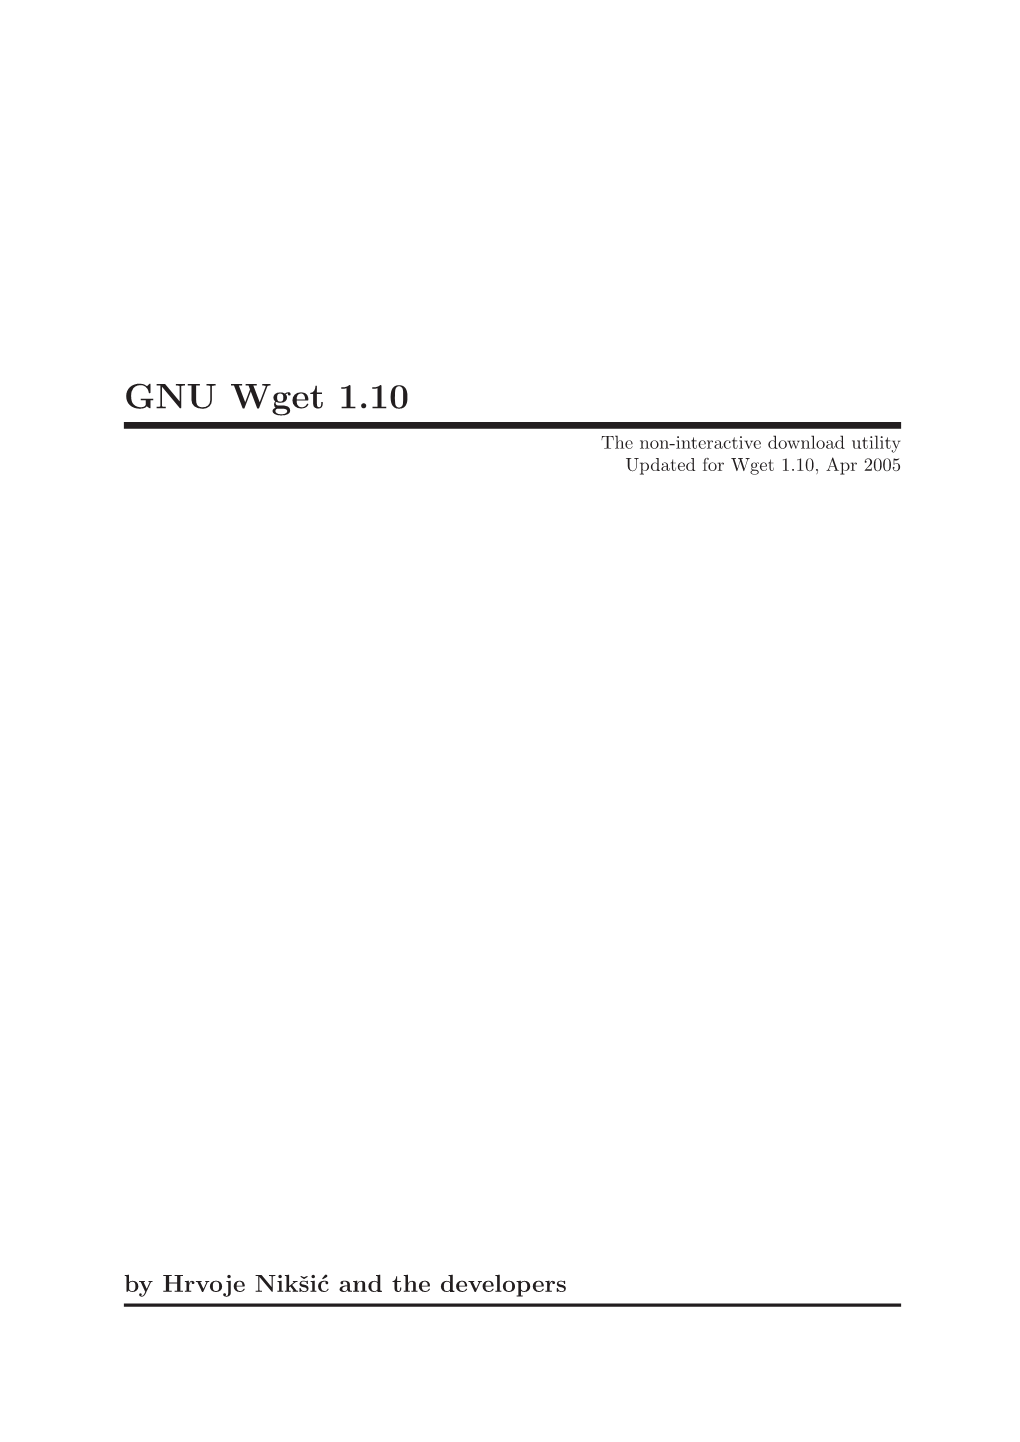 GNU Wget 1.10 the Non-Interactive Download Utility Updated for Wget 1.10, Apr 2005